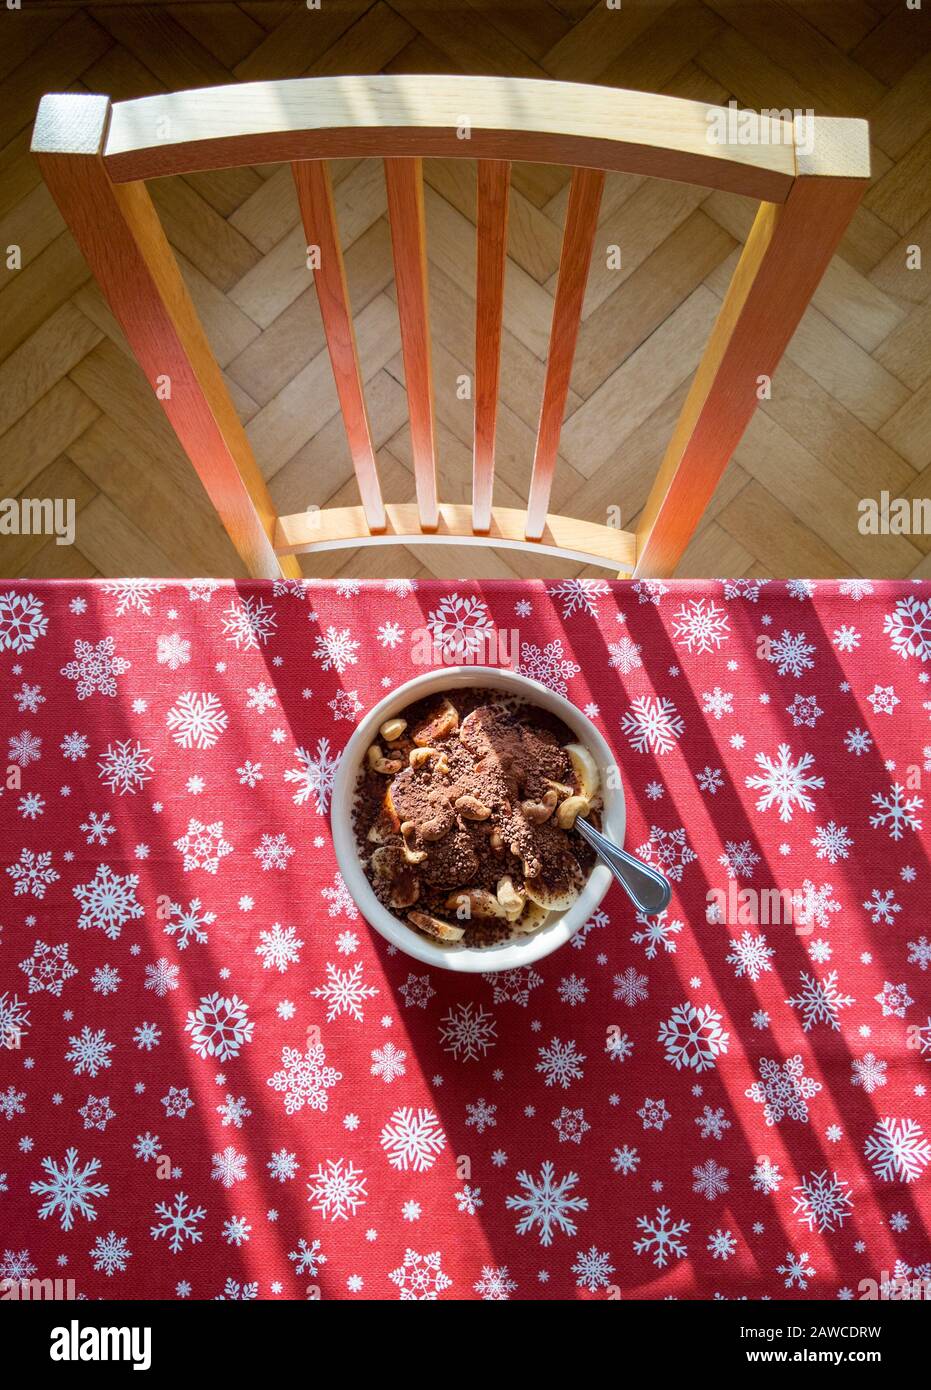 still life - breakfast on the table, red tablecloth with a pattern of snowflakes, chairs at the table - view from above Stock Photo